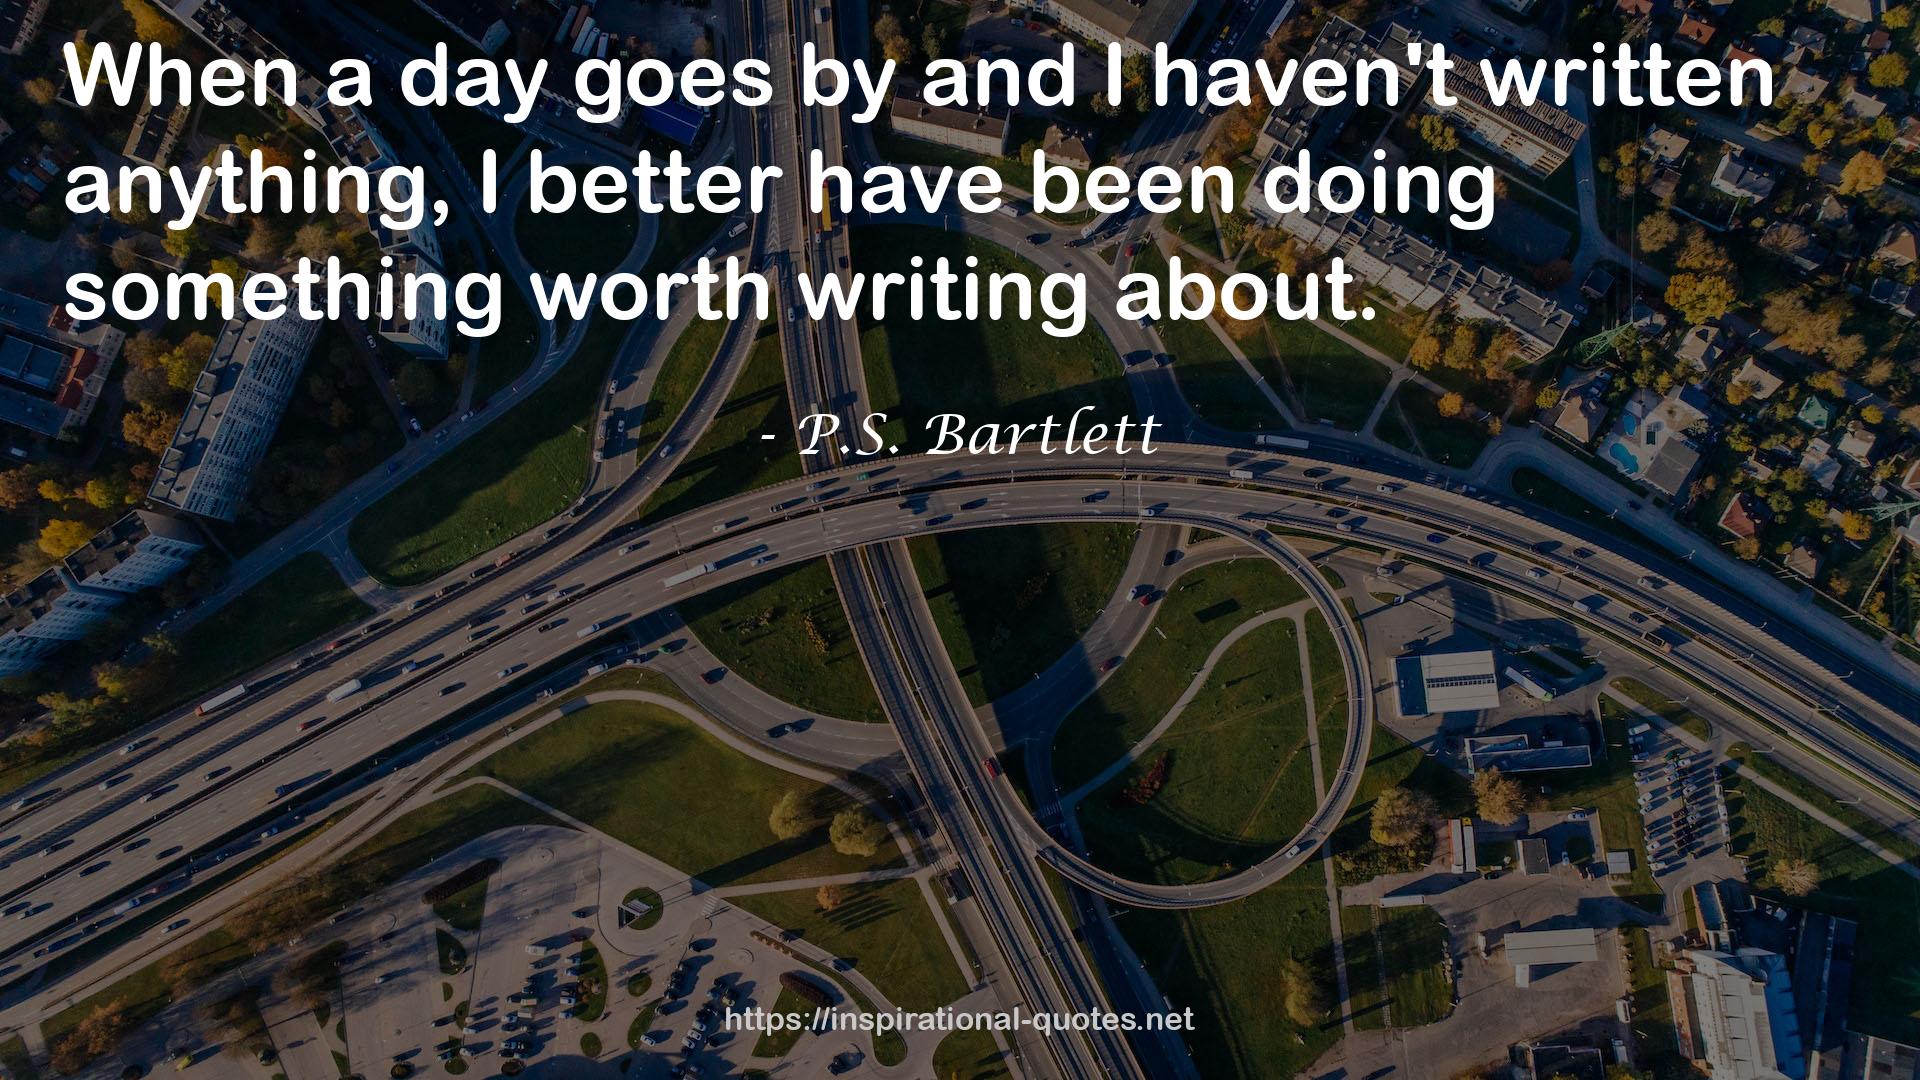 P.S. Bartlett QUOTES